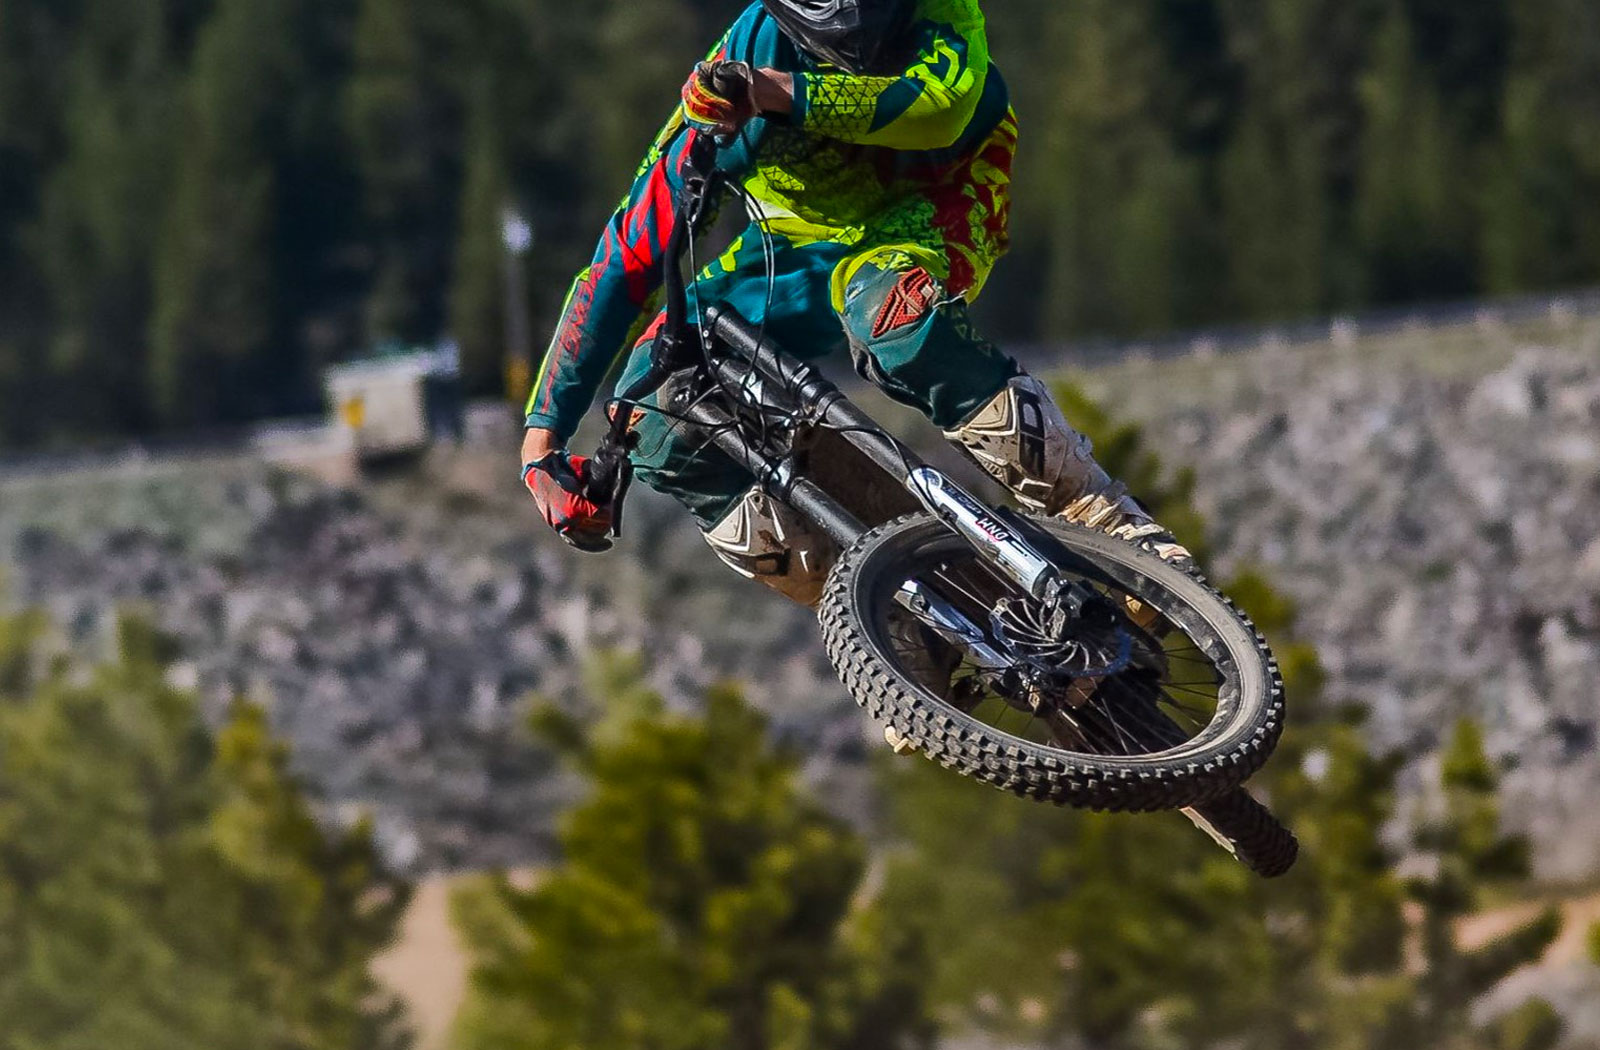 Rider during jump with off-road eBike